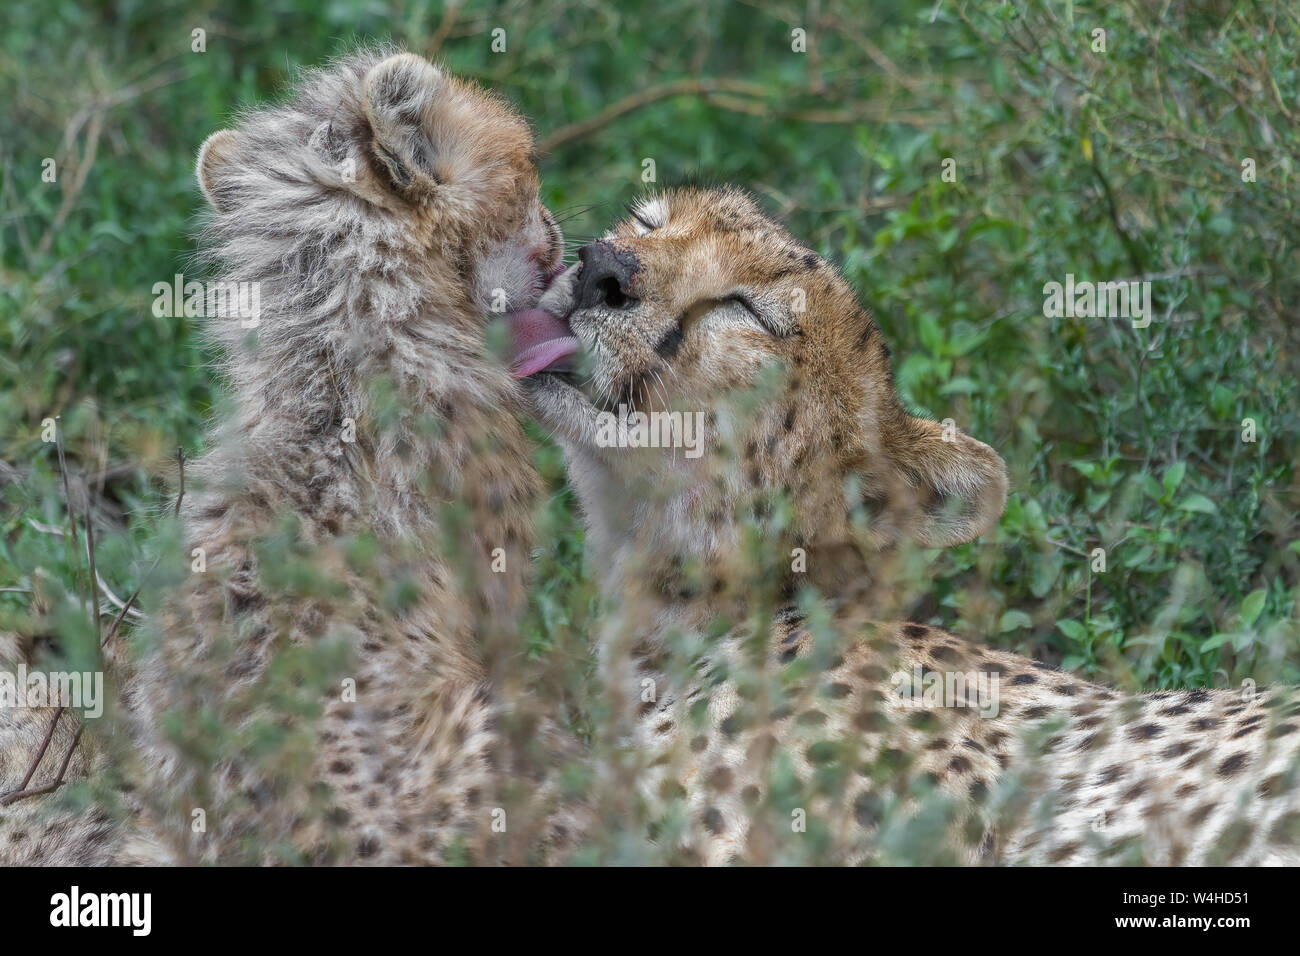 A horizontal safari photo of a mother cheetah grooming and licking her cub in the savanna in Africa. Stock Photo